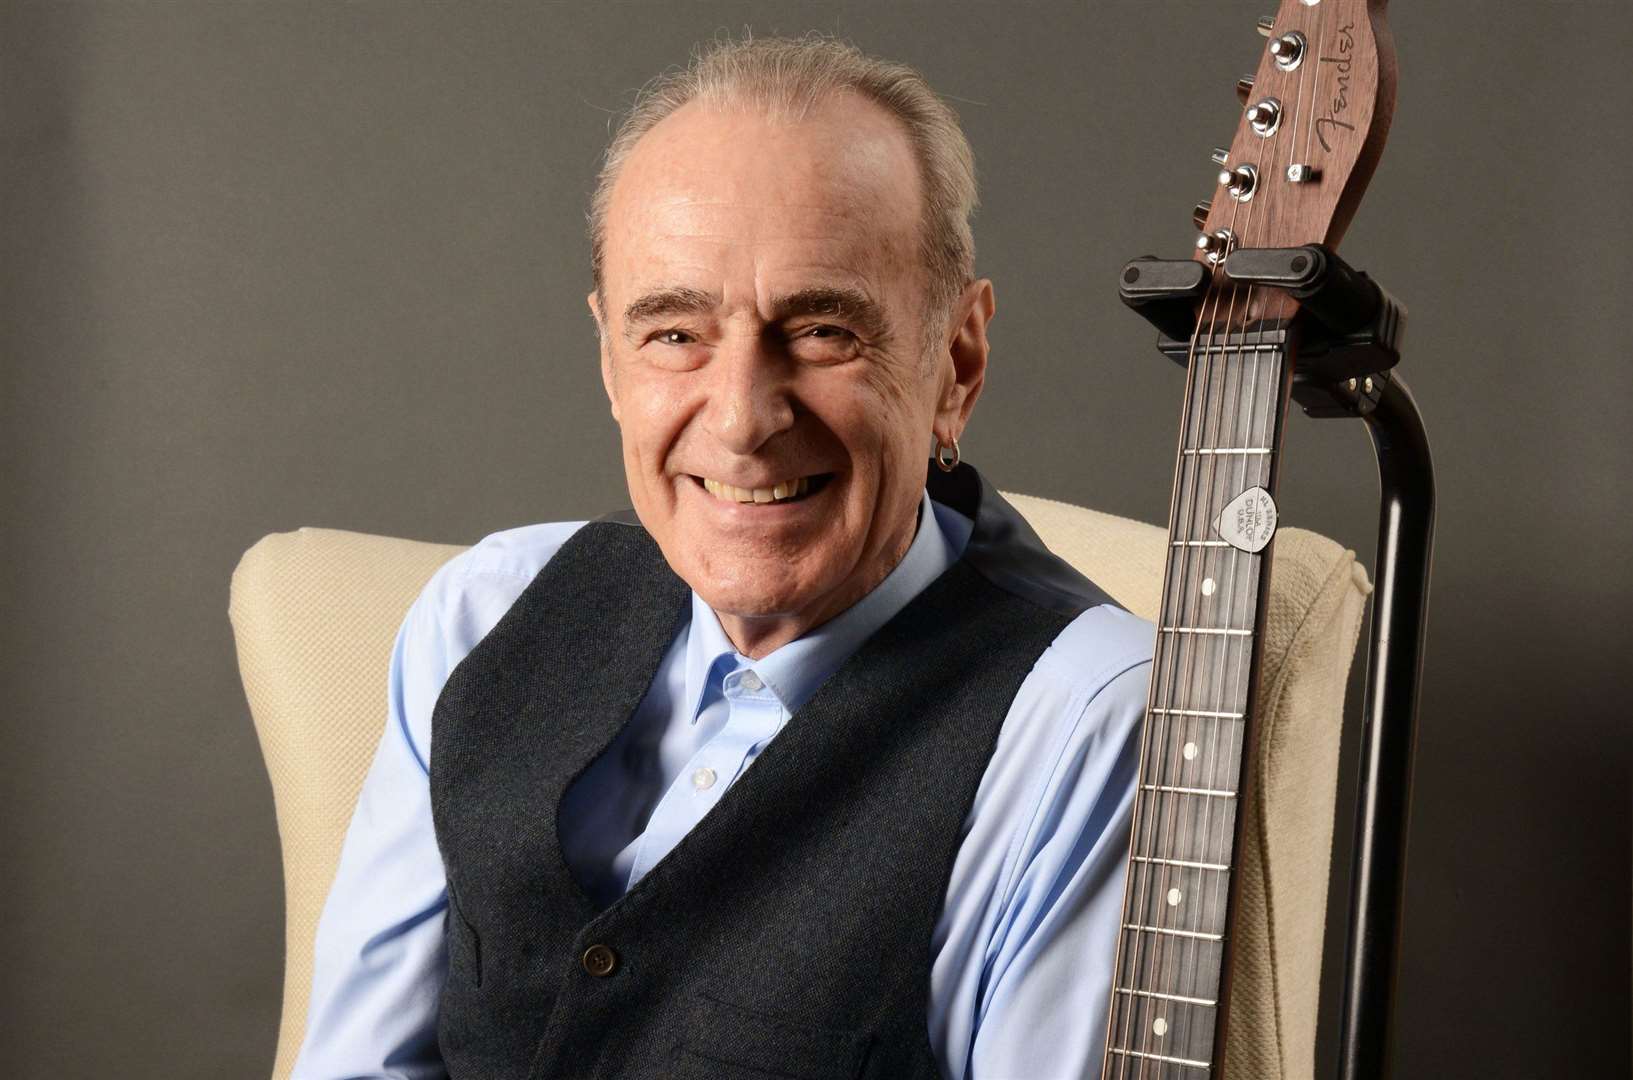 Status Quo frontman Francis Rossi will perform with the band at Dreamland next year